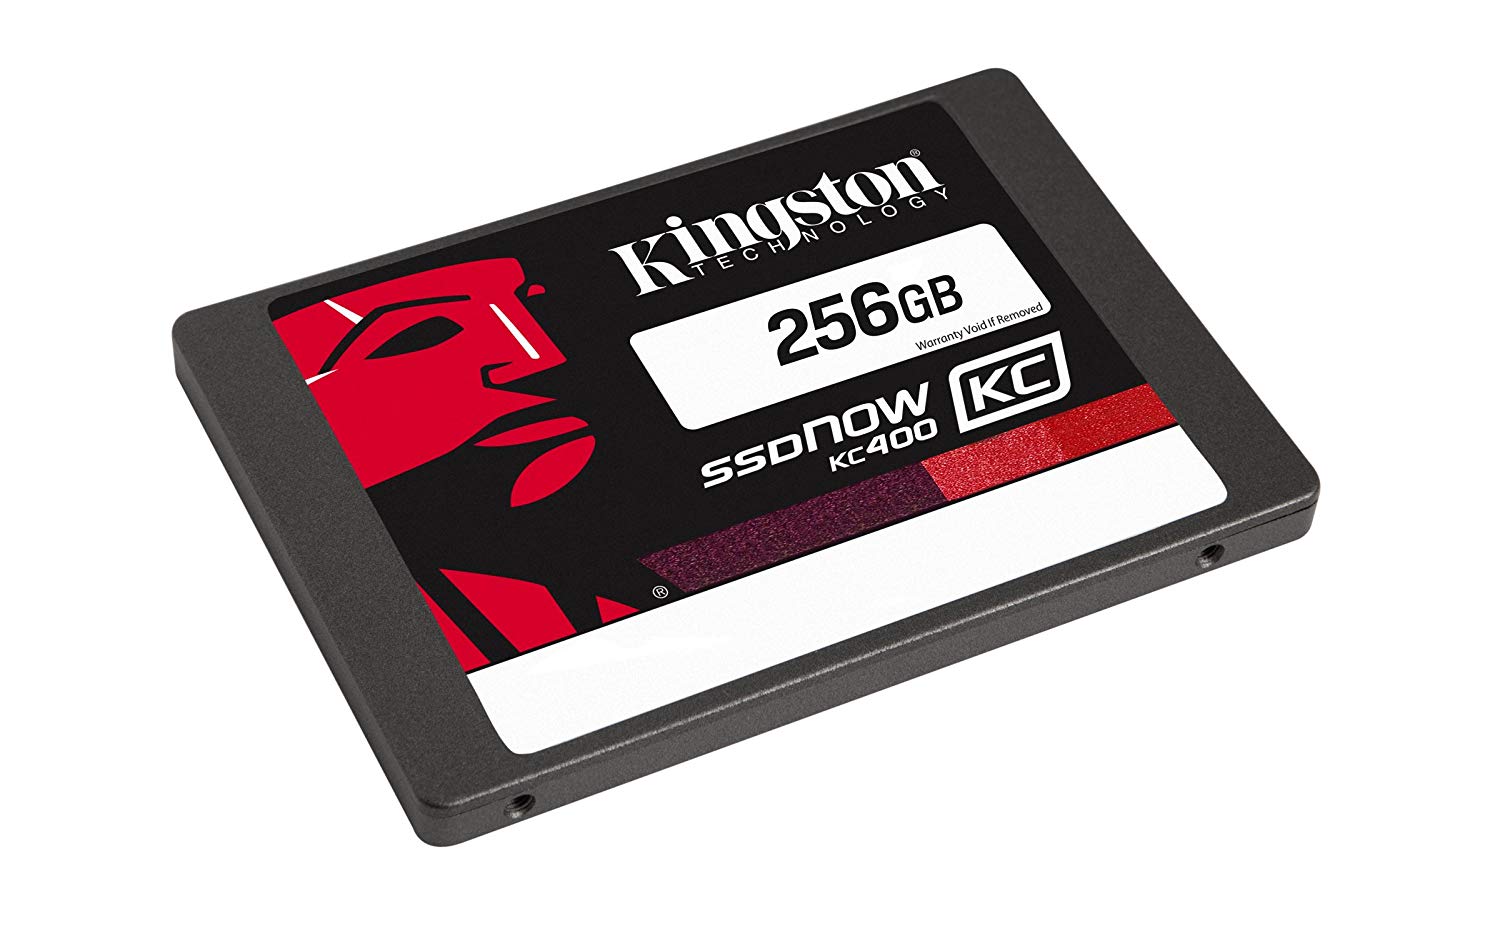 Gutter pistol Skrive ud Kingston launches KC600 series for users still stuck on 2.5-inch SATA SSDs  - NotebookCheck.net News